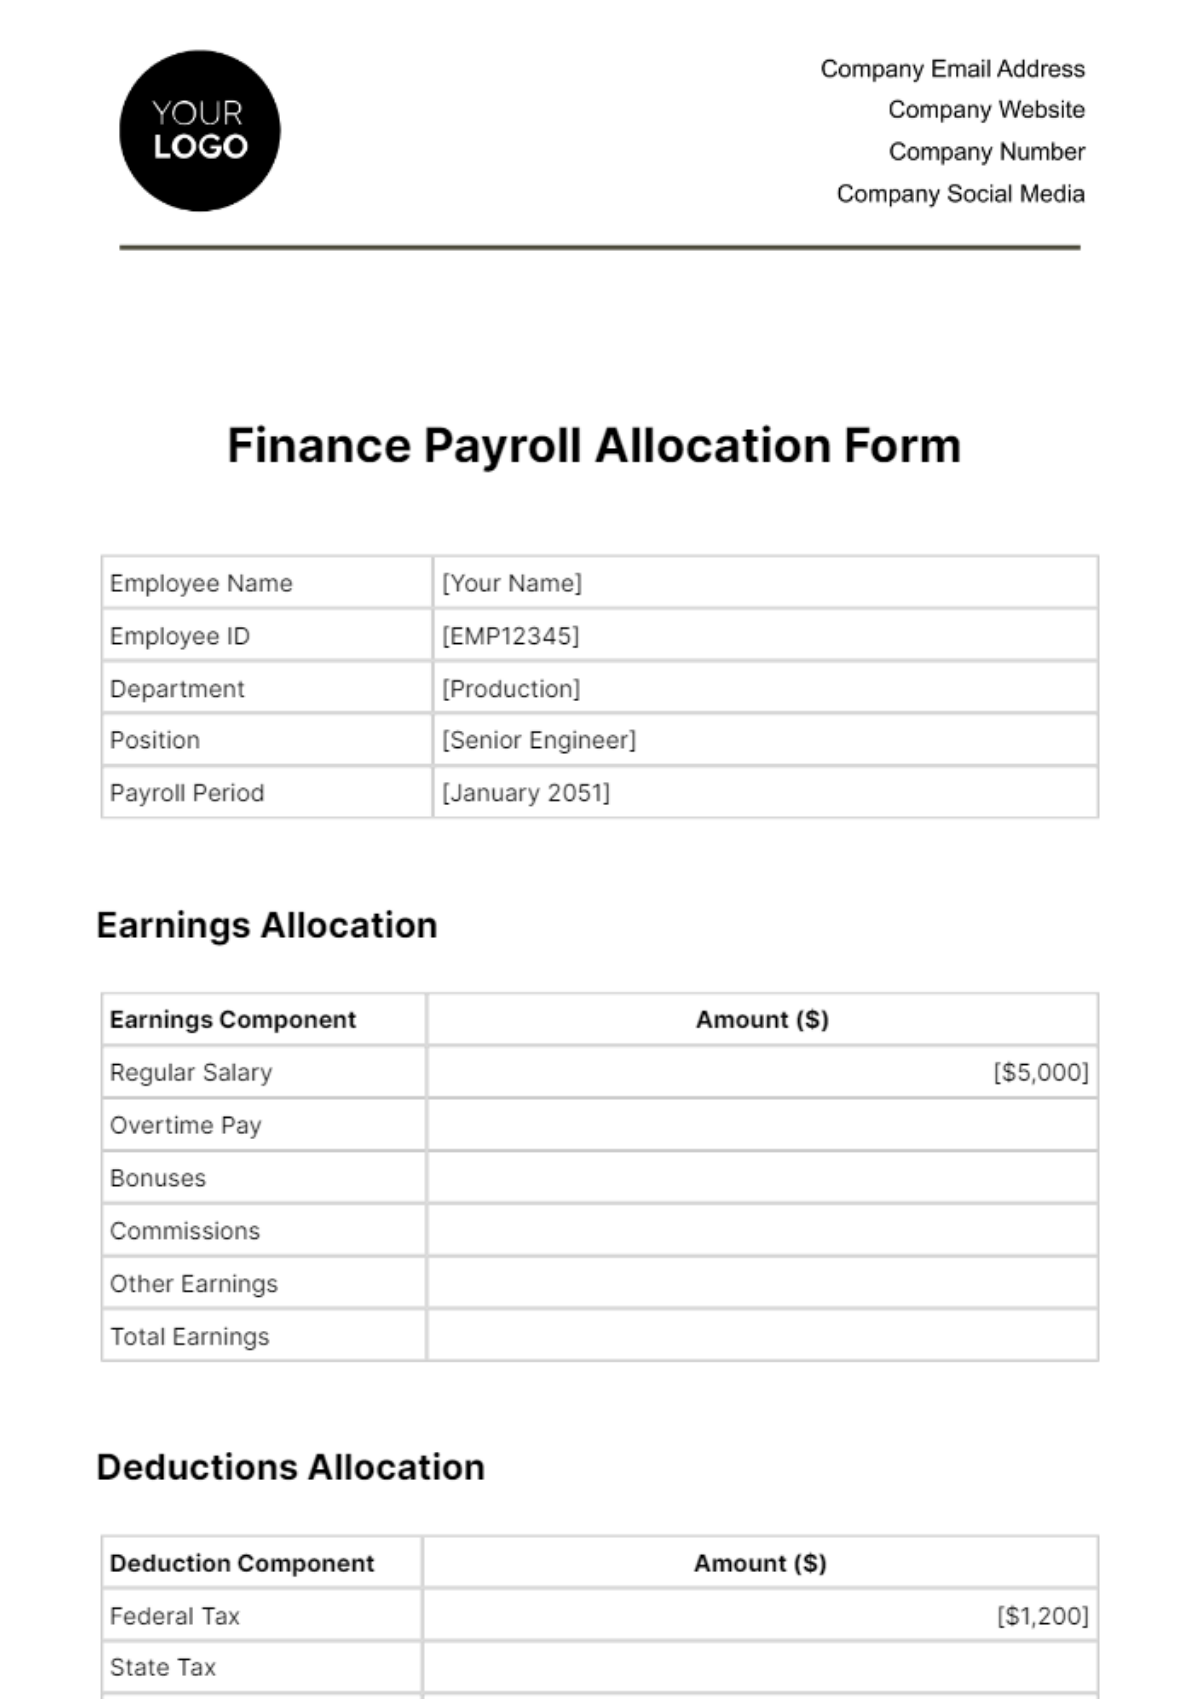 Free Finance Payroll Allocation Form Template